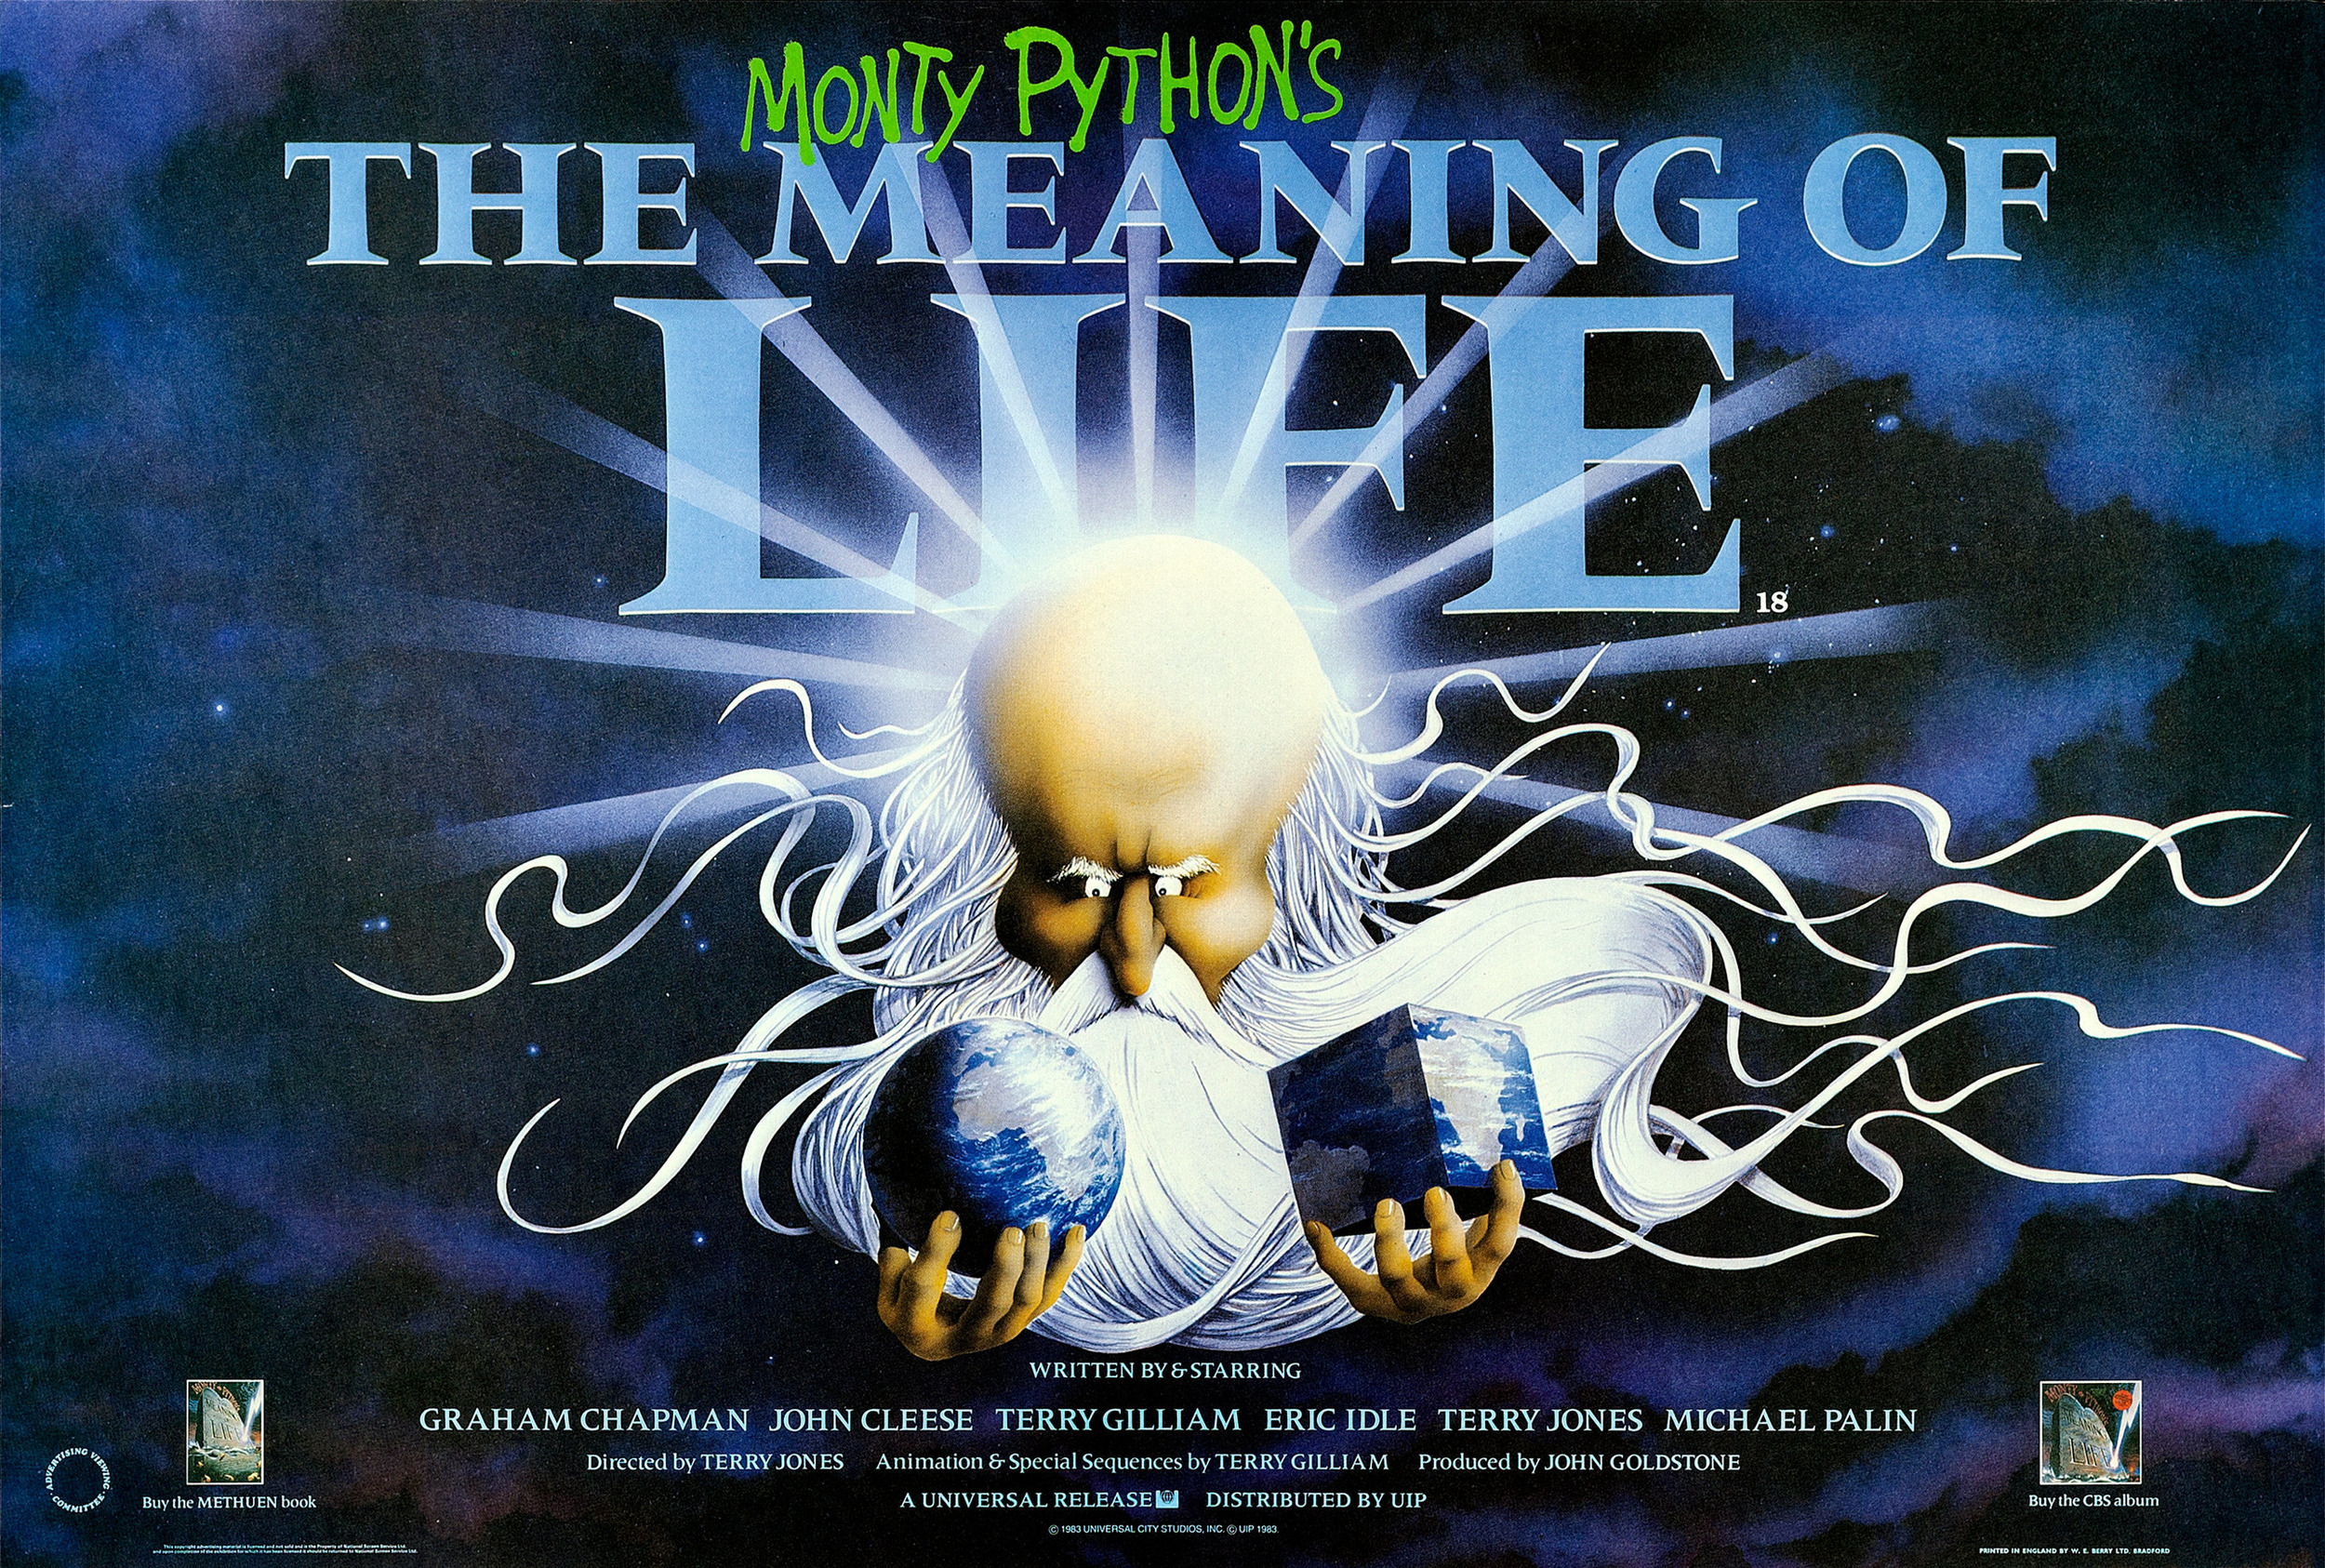 Mega Sized Movie Poster Image for Monty Python's The Meaning of Life (#2 of 2)